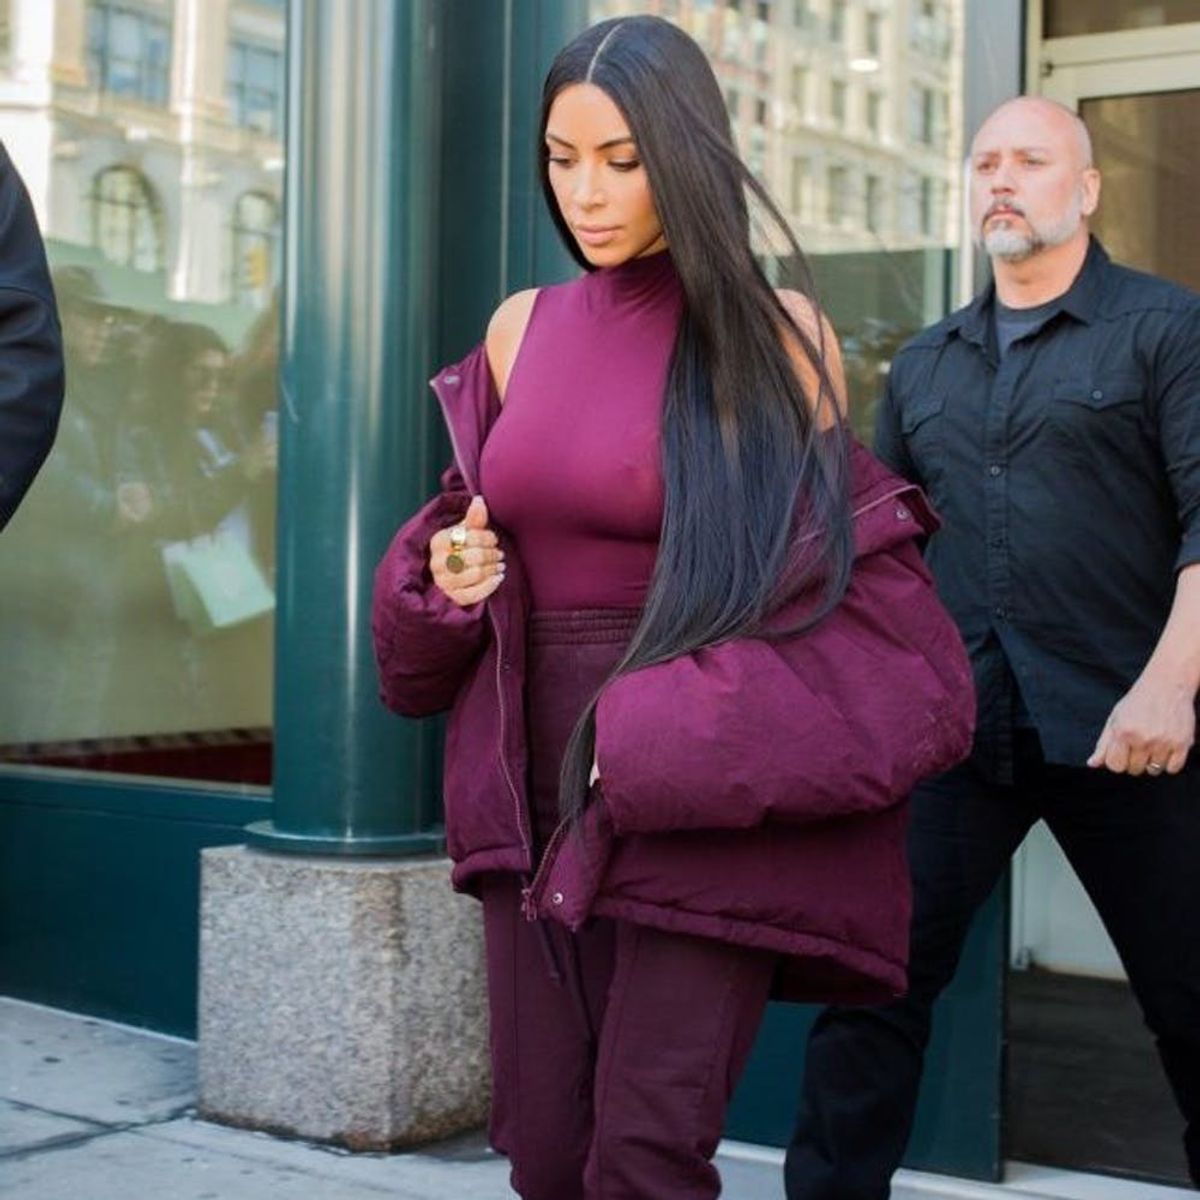 Kim Kardashian Just Rocked the Most Popular Trend That You Already Own